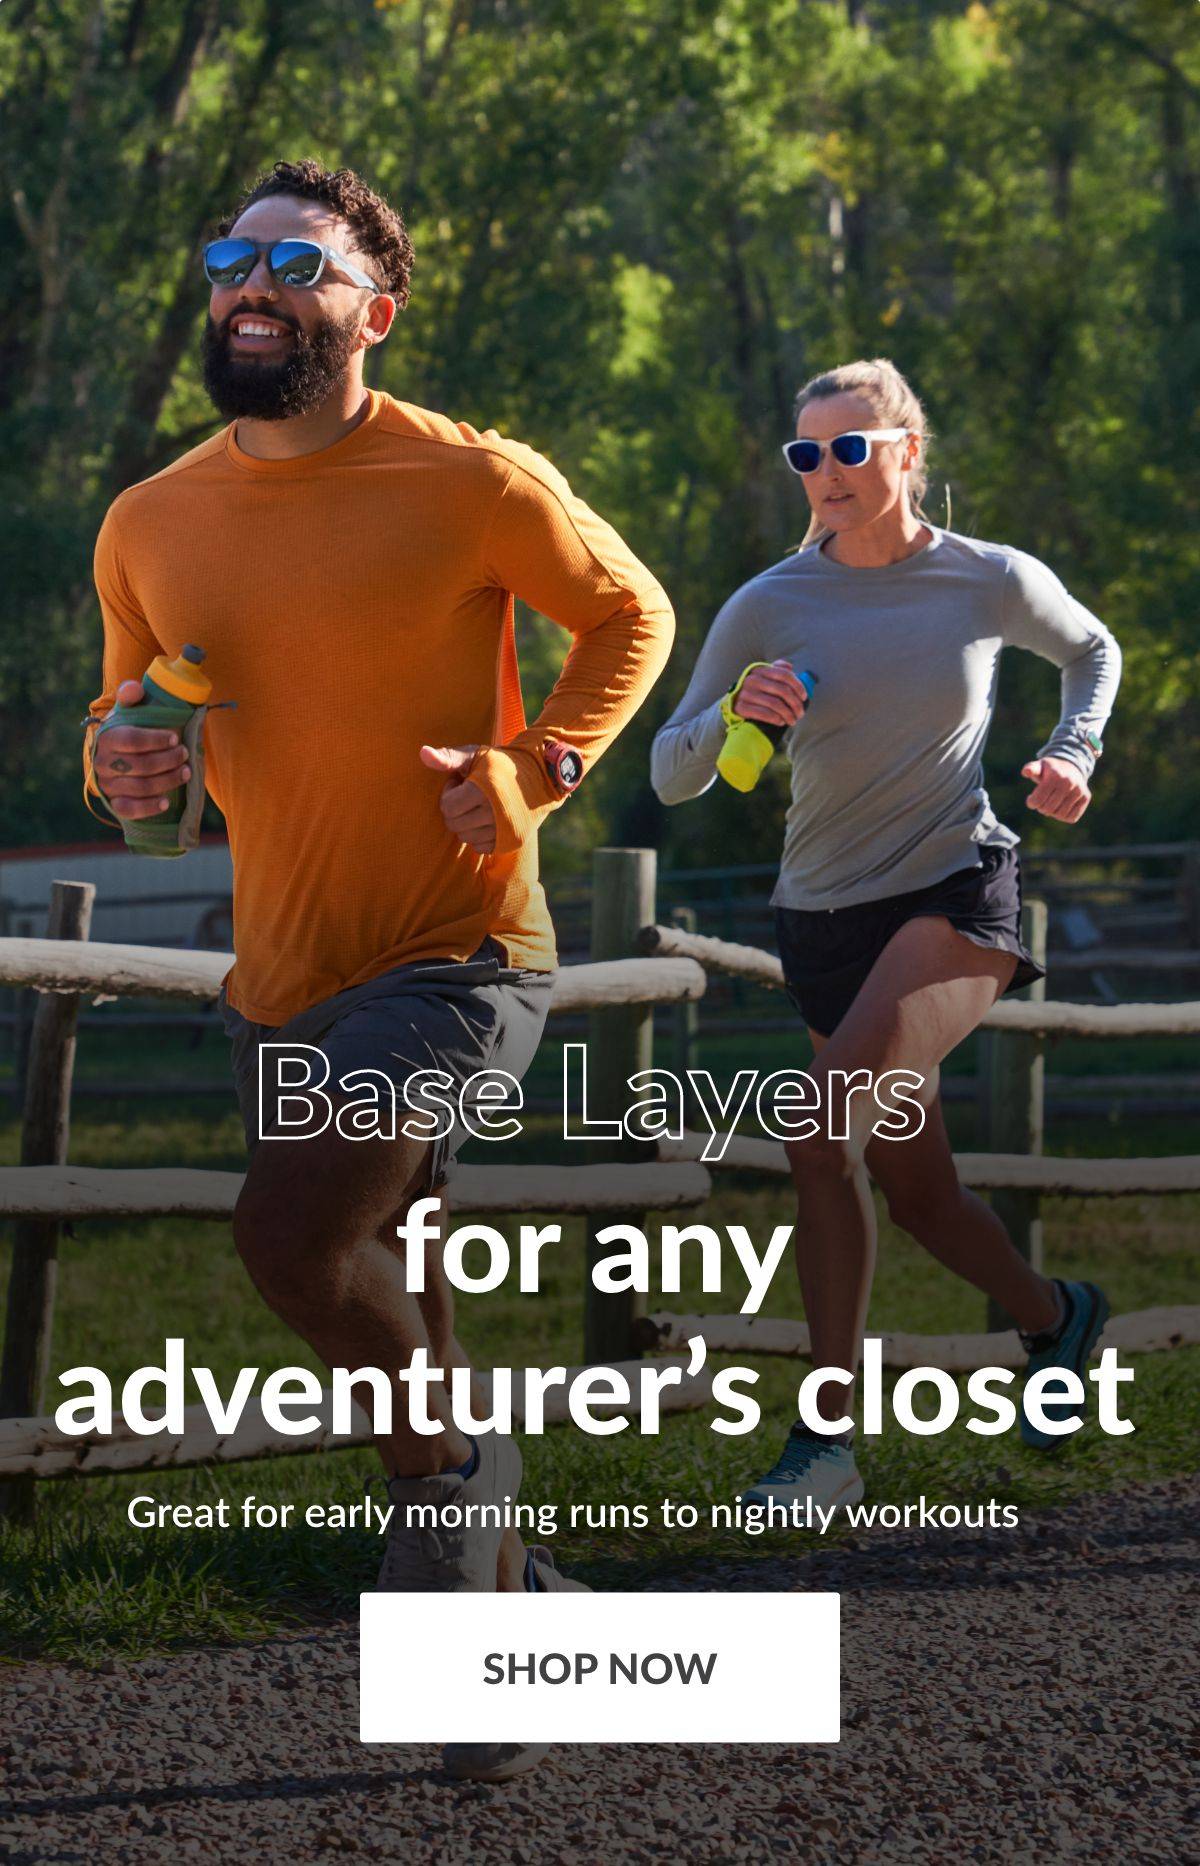 Base Layers for any adventurer's closet. Great for early morning runs to nightly workouts. Shop Now